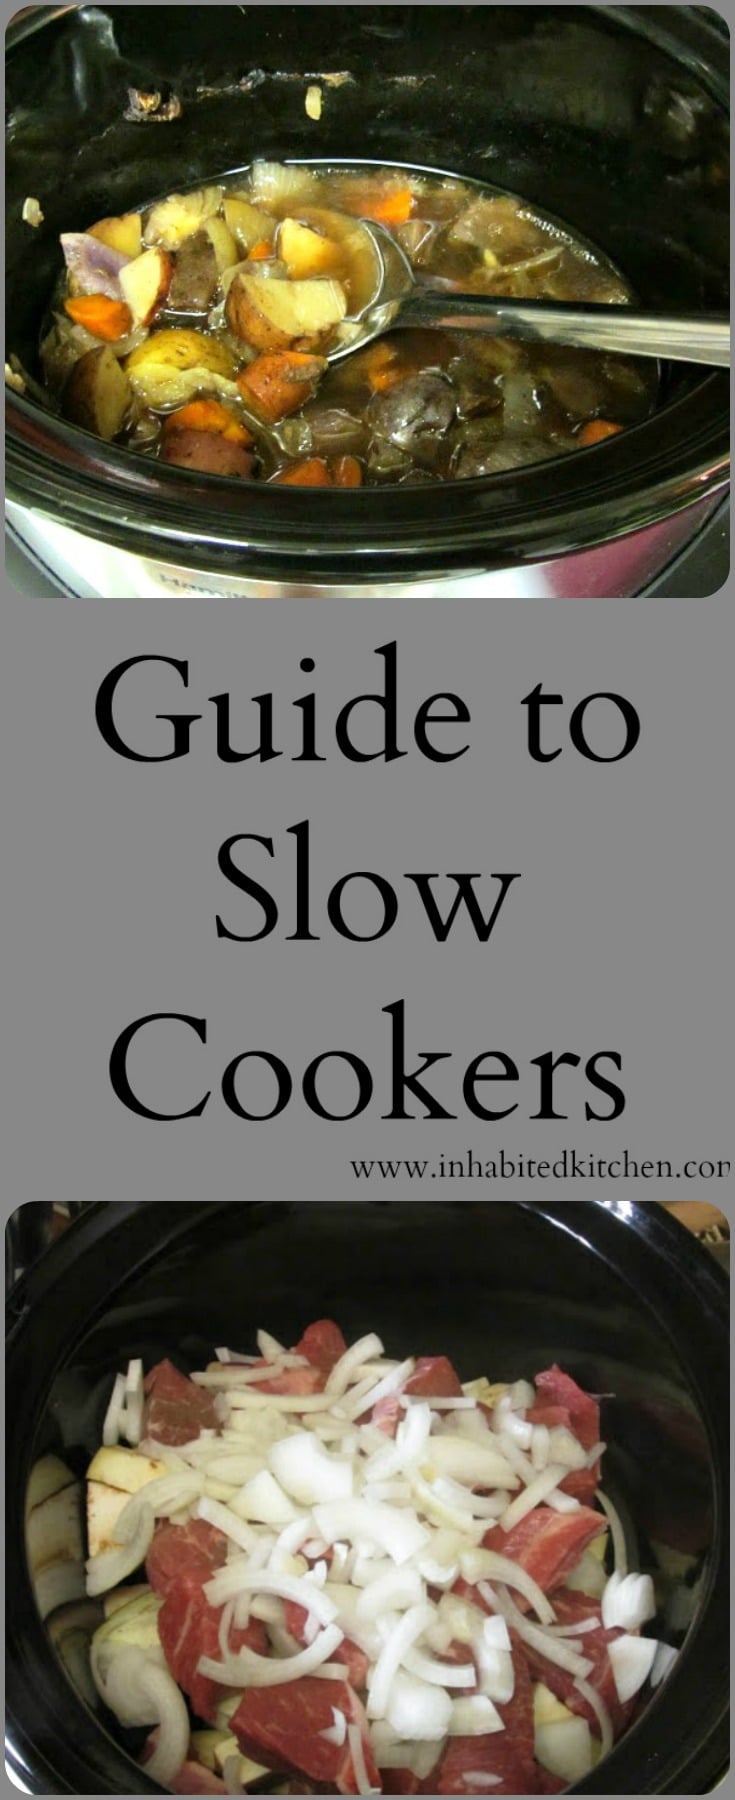 Cooking for Two Tips: Downsizing Your Crock Pot - Recipes That Crock!